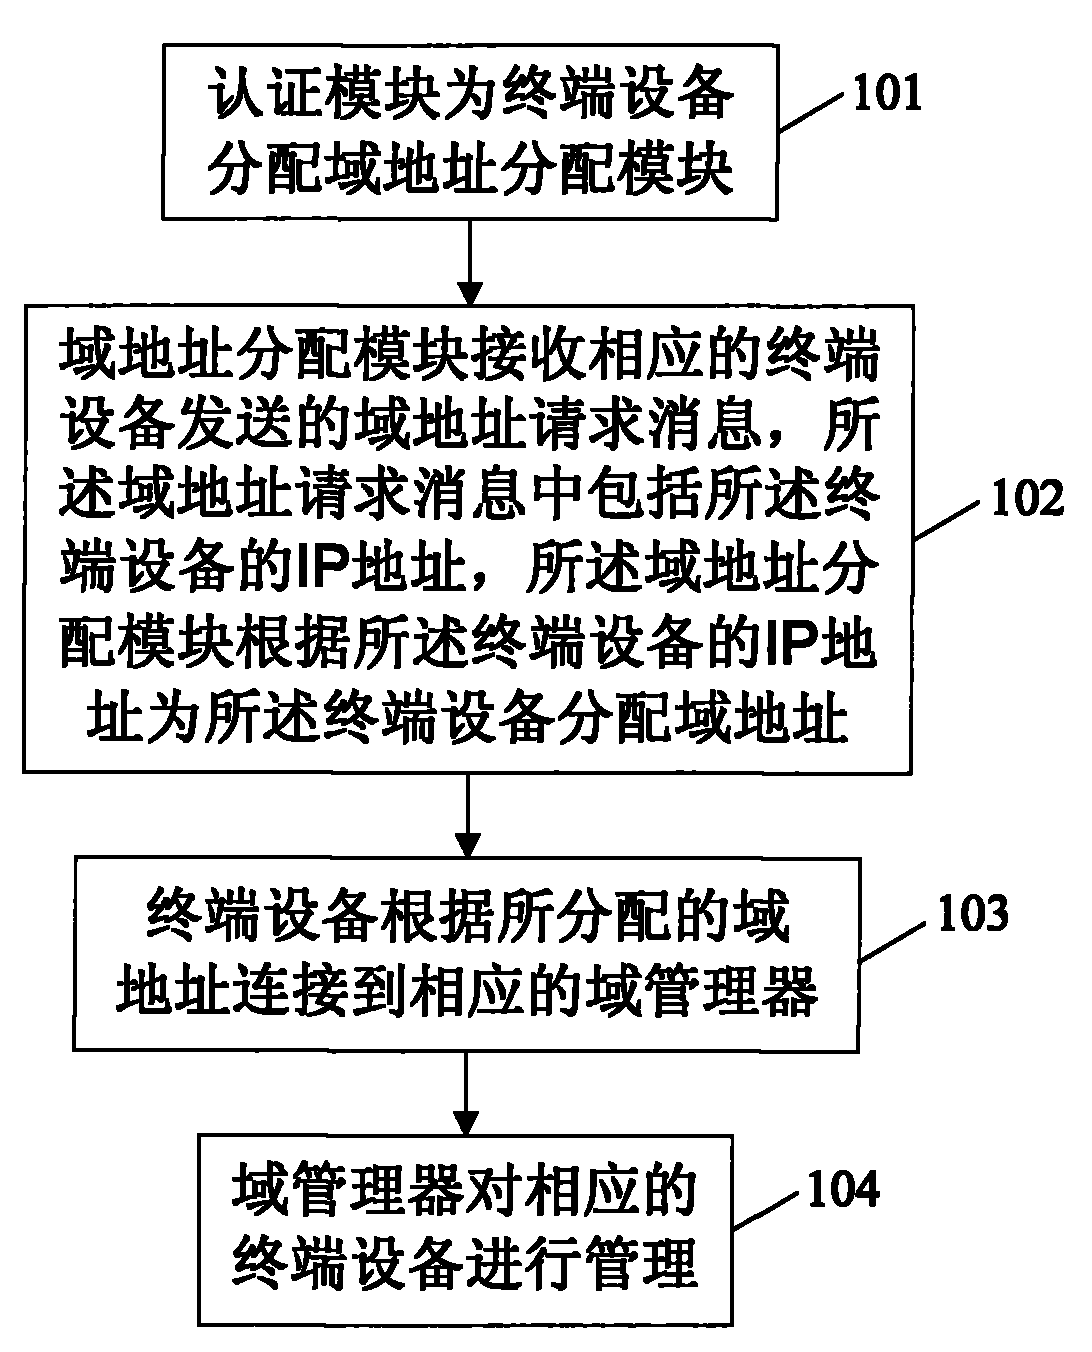 Terminal apparatus management method and system